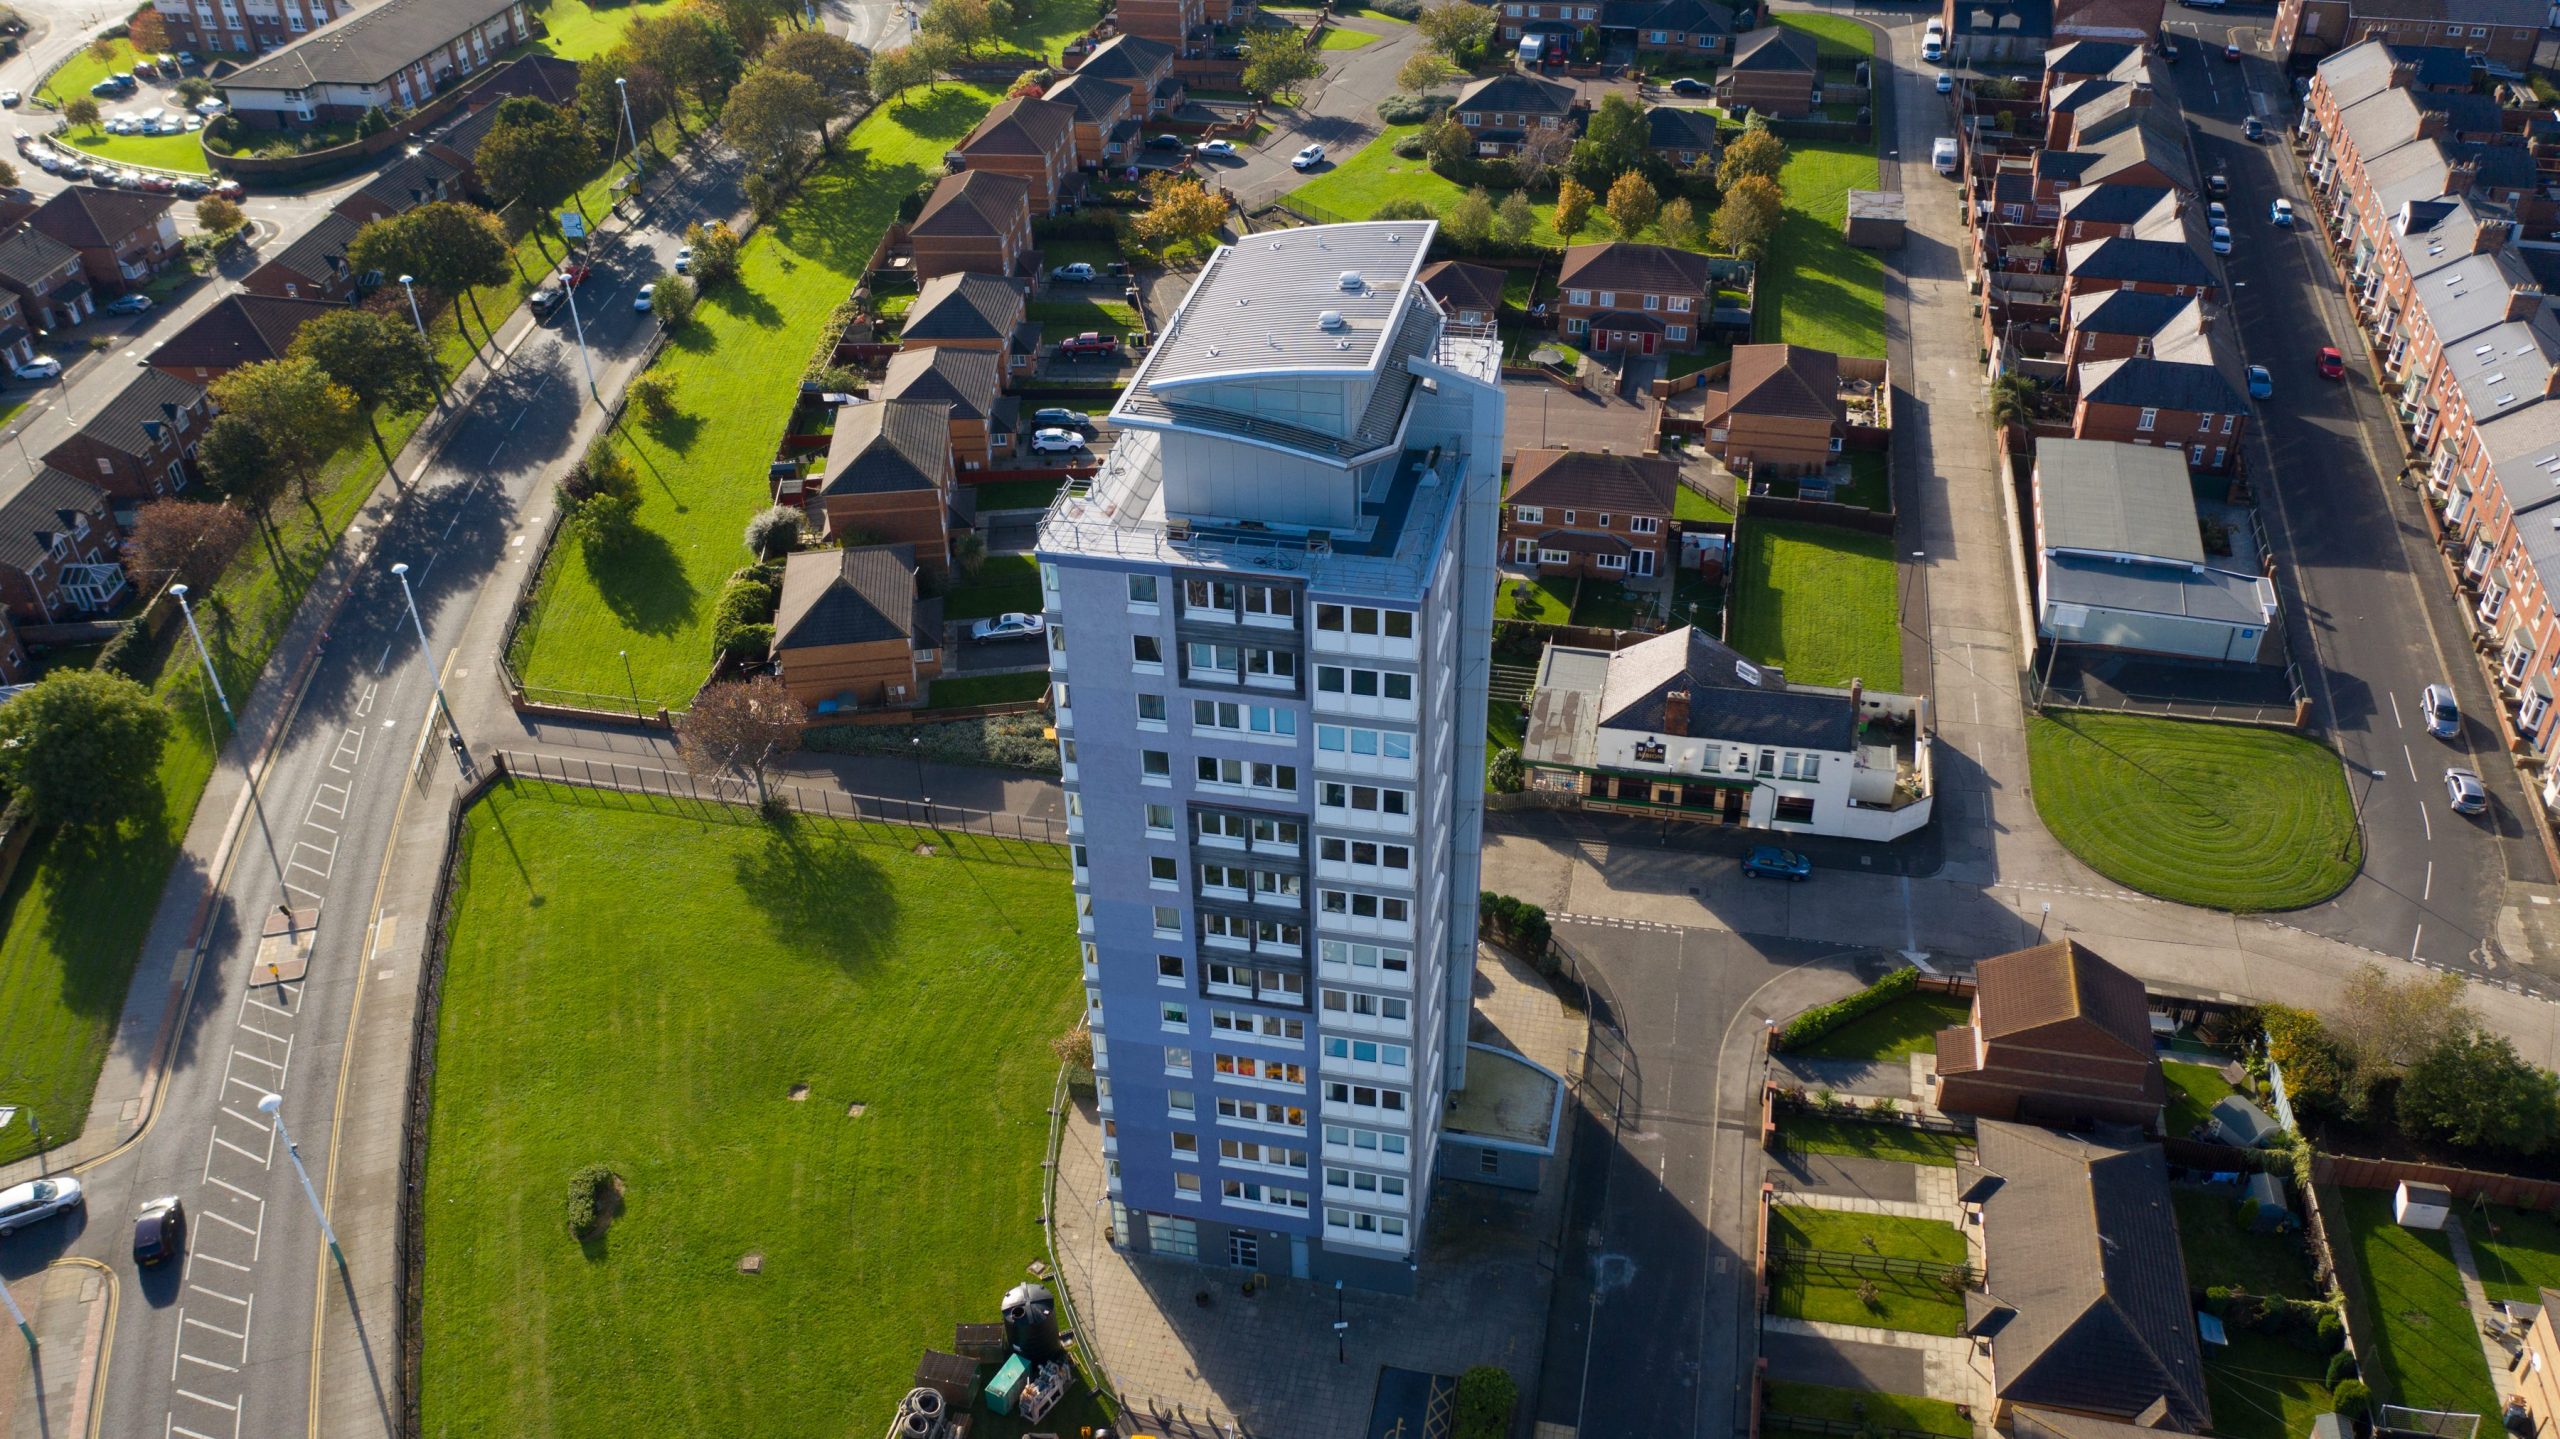 Flats on the North of Sunderland, which form part of Gentoo’s Core 364 project.